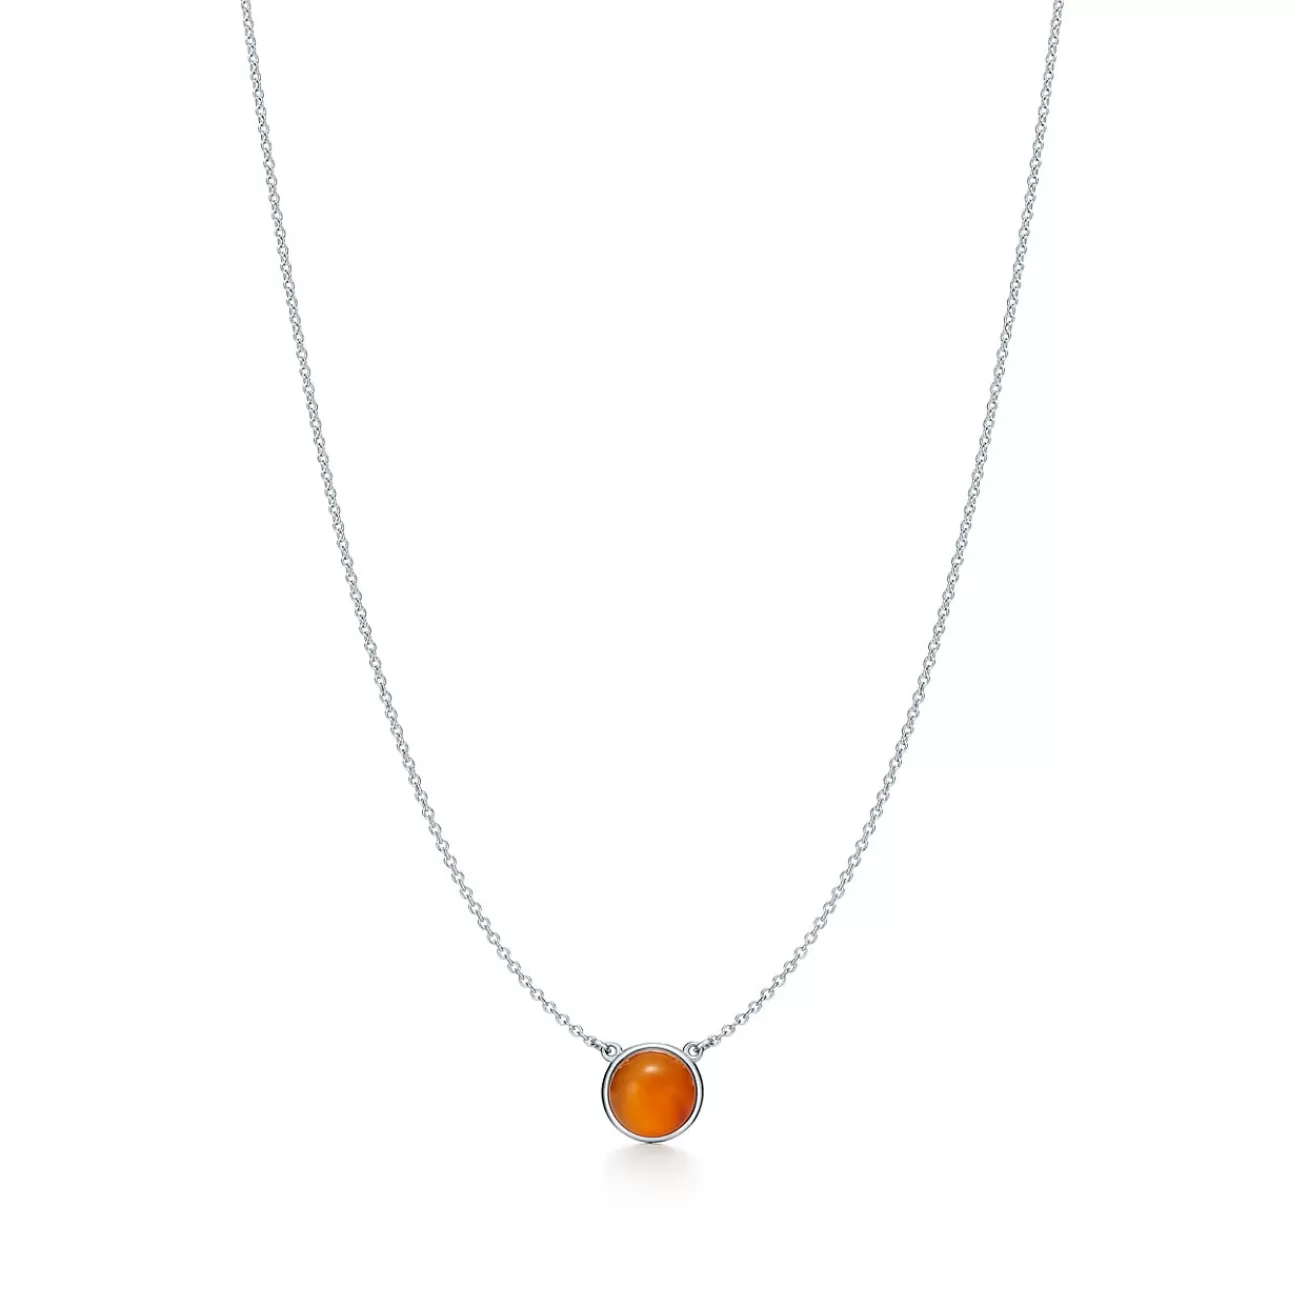 Tiffany & Co. Elsa Peretti® Color by the Yard Orange Chalcedony Pendant in Silver | ^ Necklaces & Pendants | Sterling Silver Jewelry